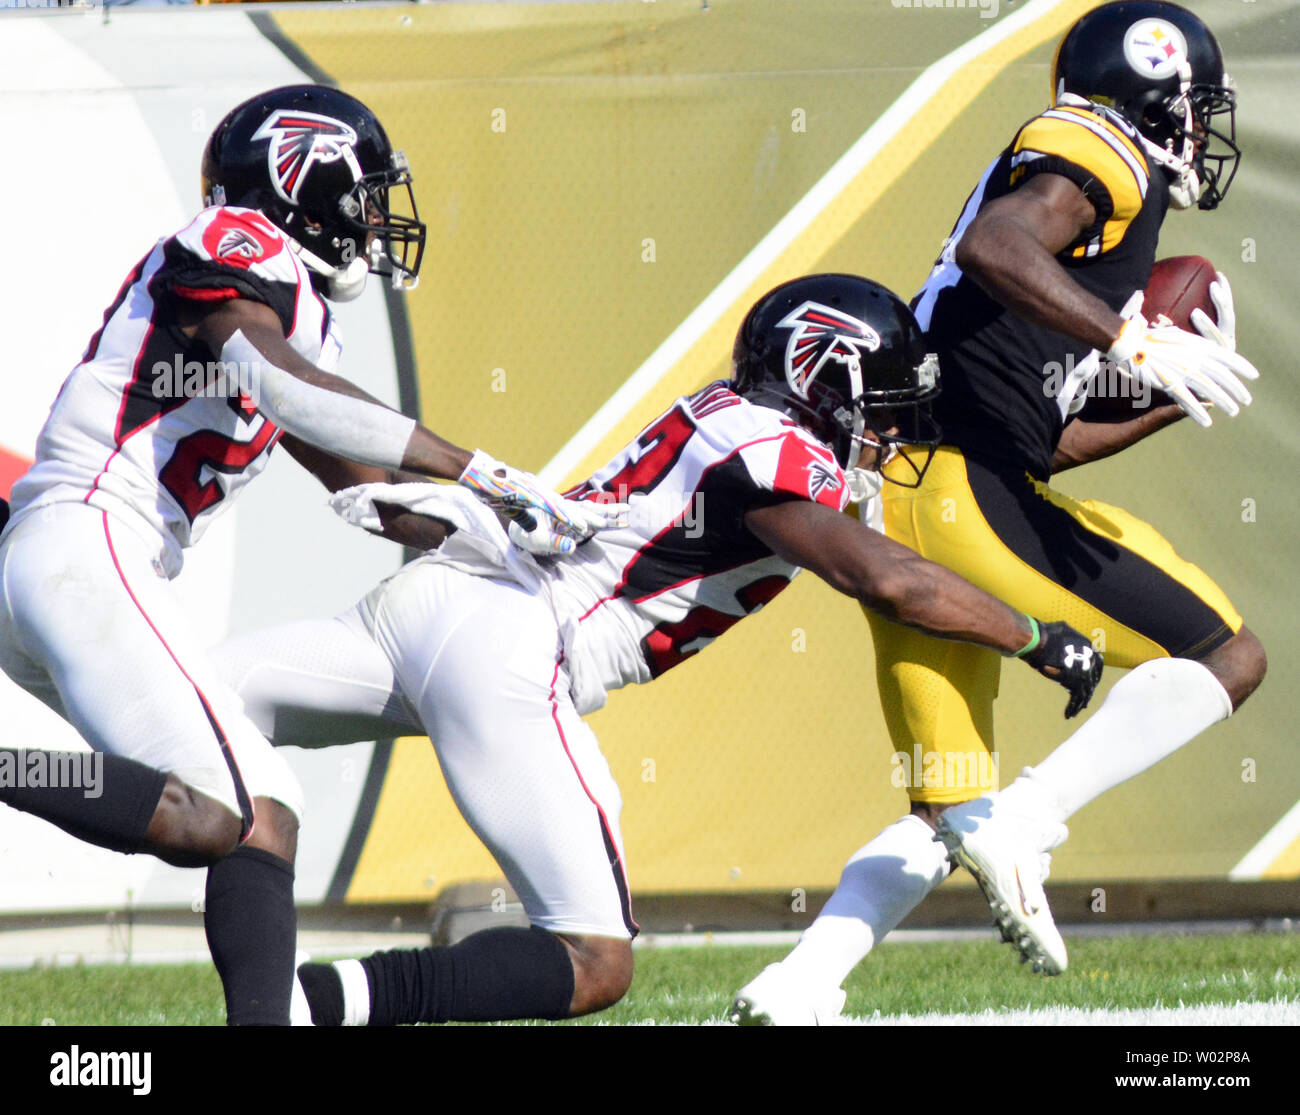 Pittsburgh Steelers wide receiver Antonio Brown (84) pulls in a 47 yard reception for a touchdown with Atlanta Falcons cornerback Robert Alford (23) and Atlanta Falcons strong safety Damontae Kazee (27) in coverage in the fourth quarter of the Steelers 41-17 win against the Atlanta Falcons at Heinz Field in Pittsburgh on October 7, 2018. Photo by Archie Carpenter/UPI Stock Photo